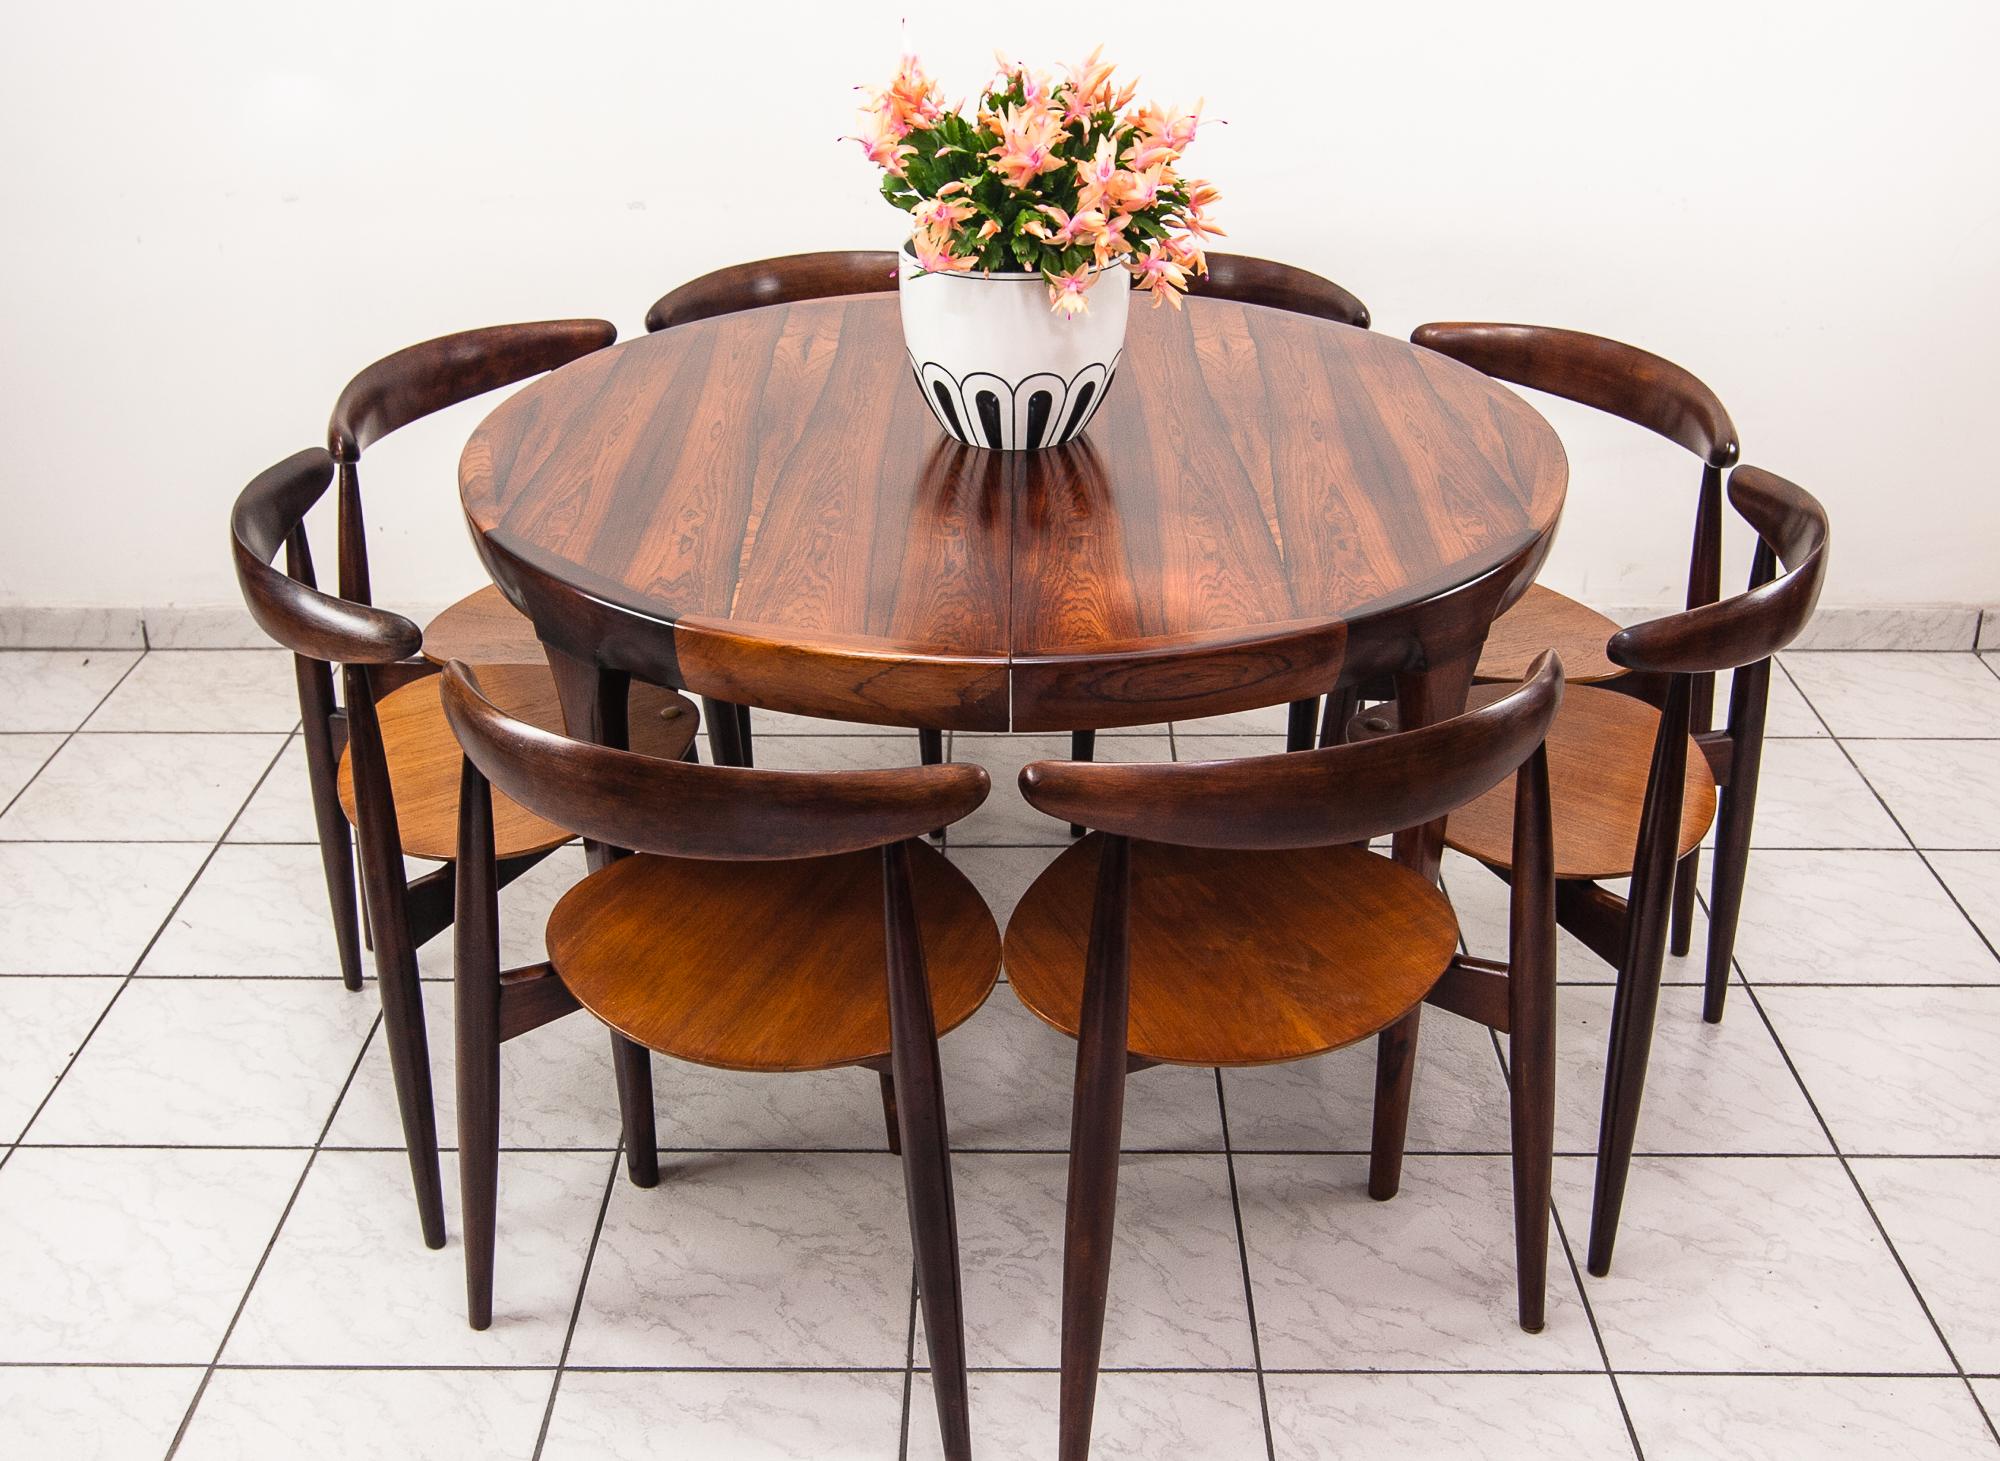 Hans J Wegner ‘The Heart' dining suite made in Denmark by Fritz Hansen circa 1950,
with eight ‘heart’ chairs Model FH4103 made from teak and beech frames, the chairs are all stackable,
the table is made from palisander wood, The table is not by Hans